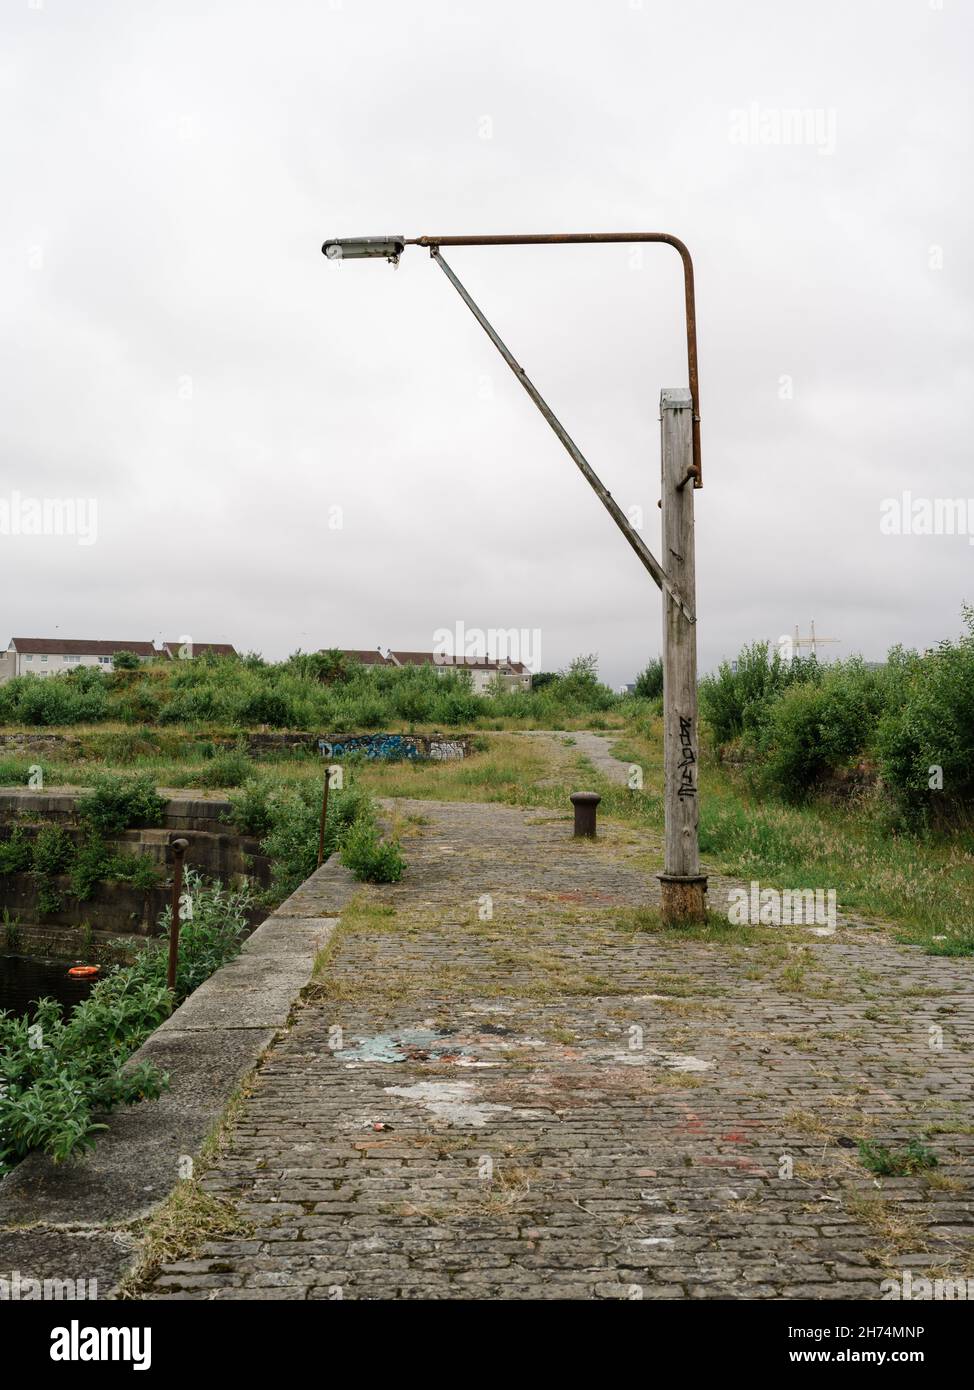 An area of historic interest, derelict and disused, the brownfield site of Govan Graving Docks, Scotland Stock Photo